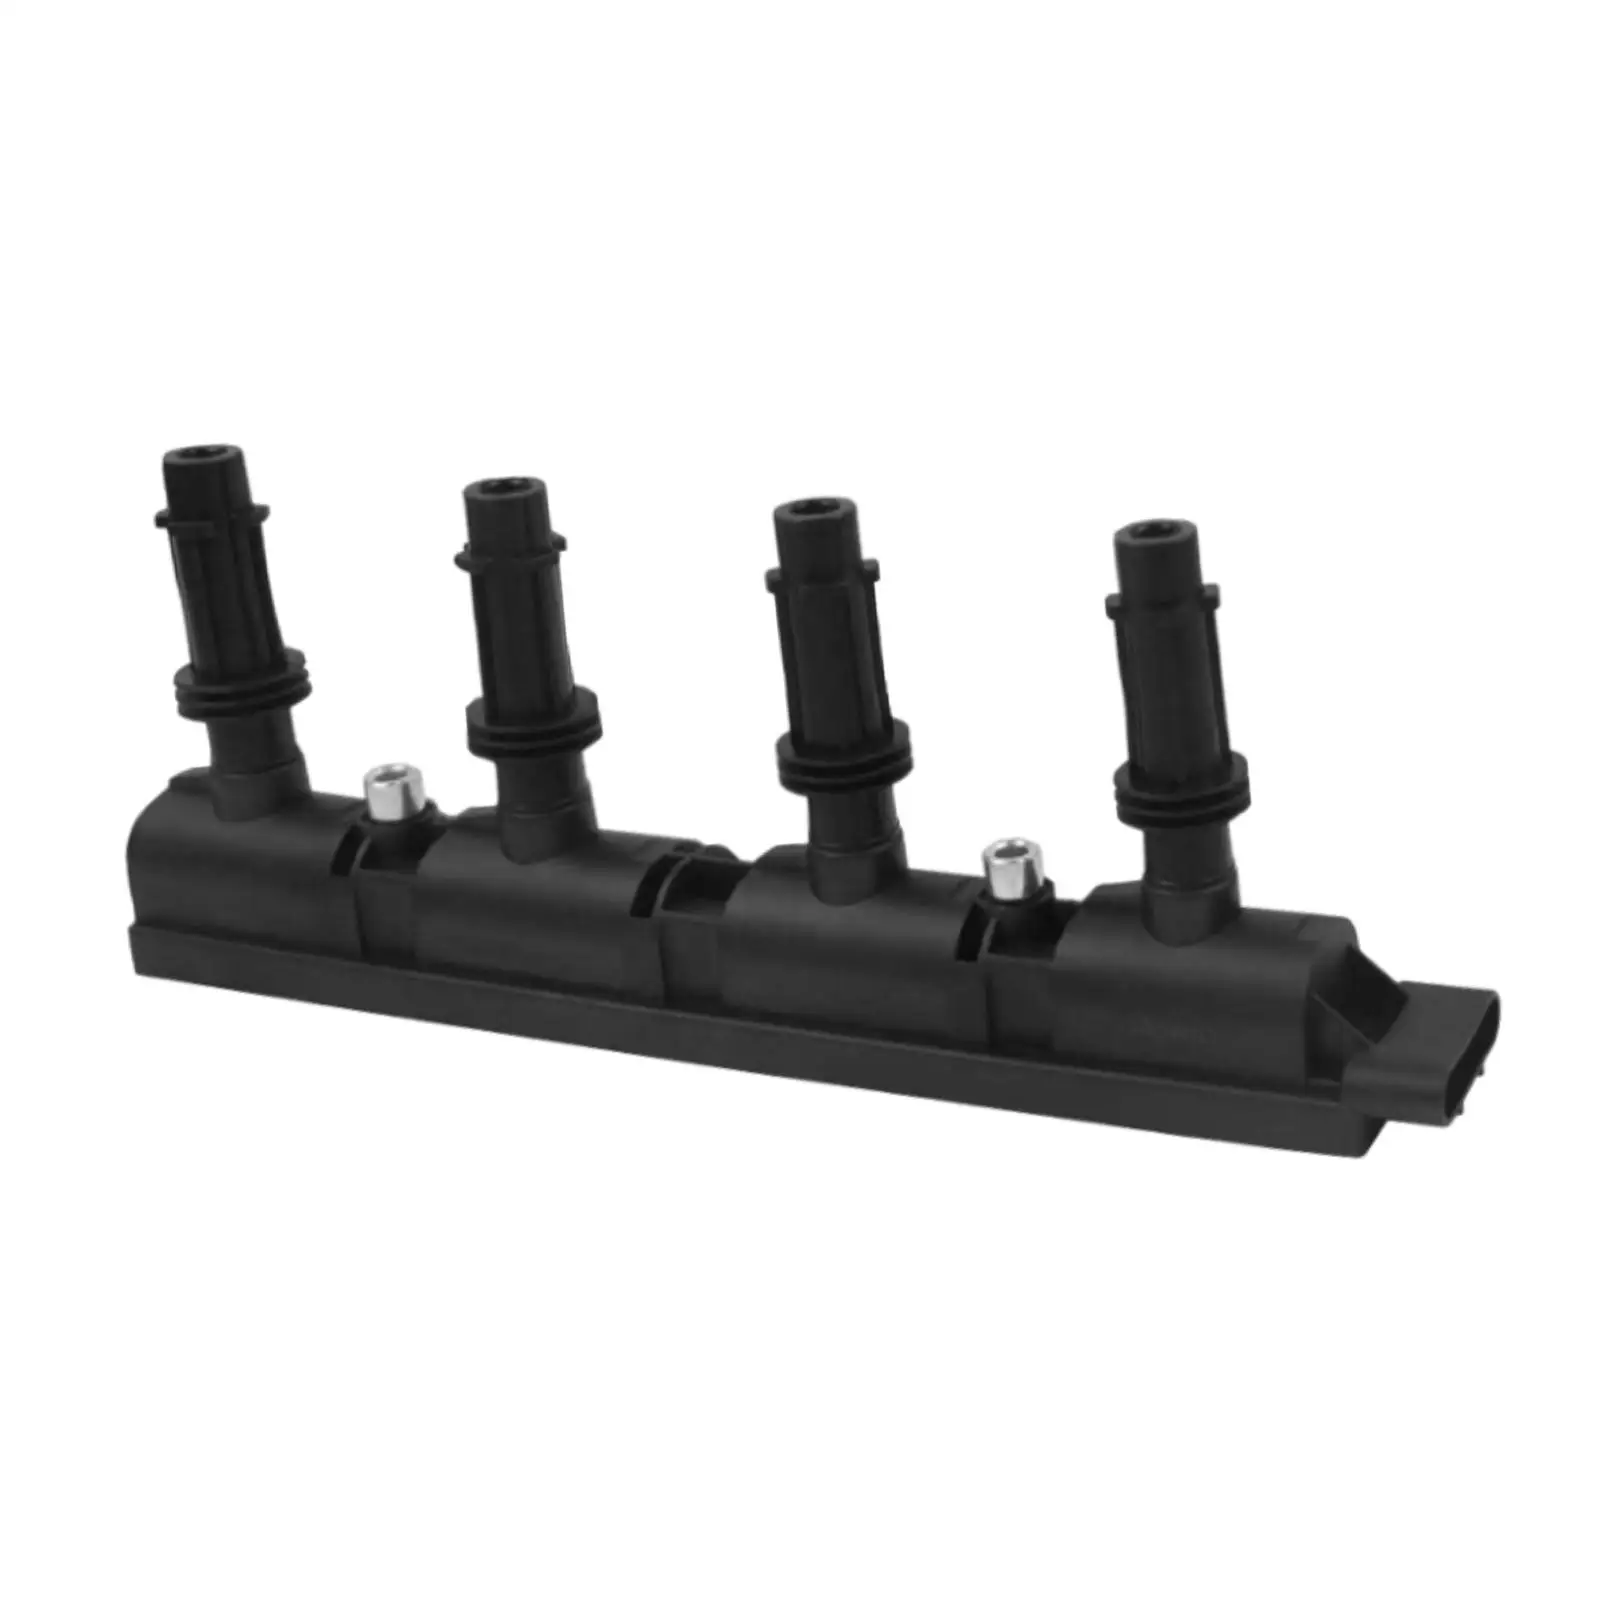 Ignition Coil Pack 25198623 for Chevy Cruze Repairing Accessory Sturdy